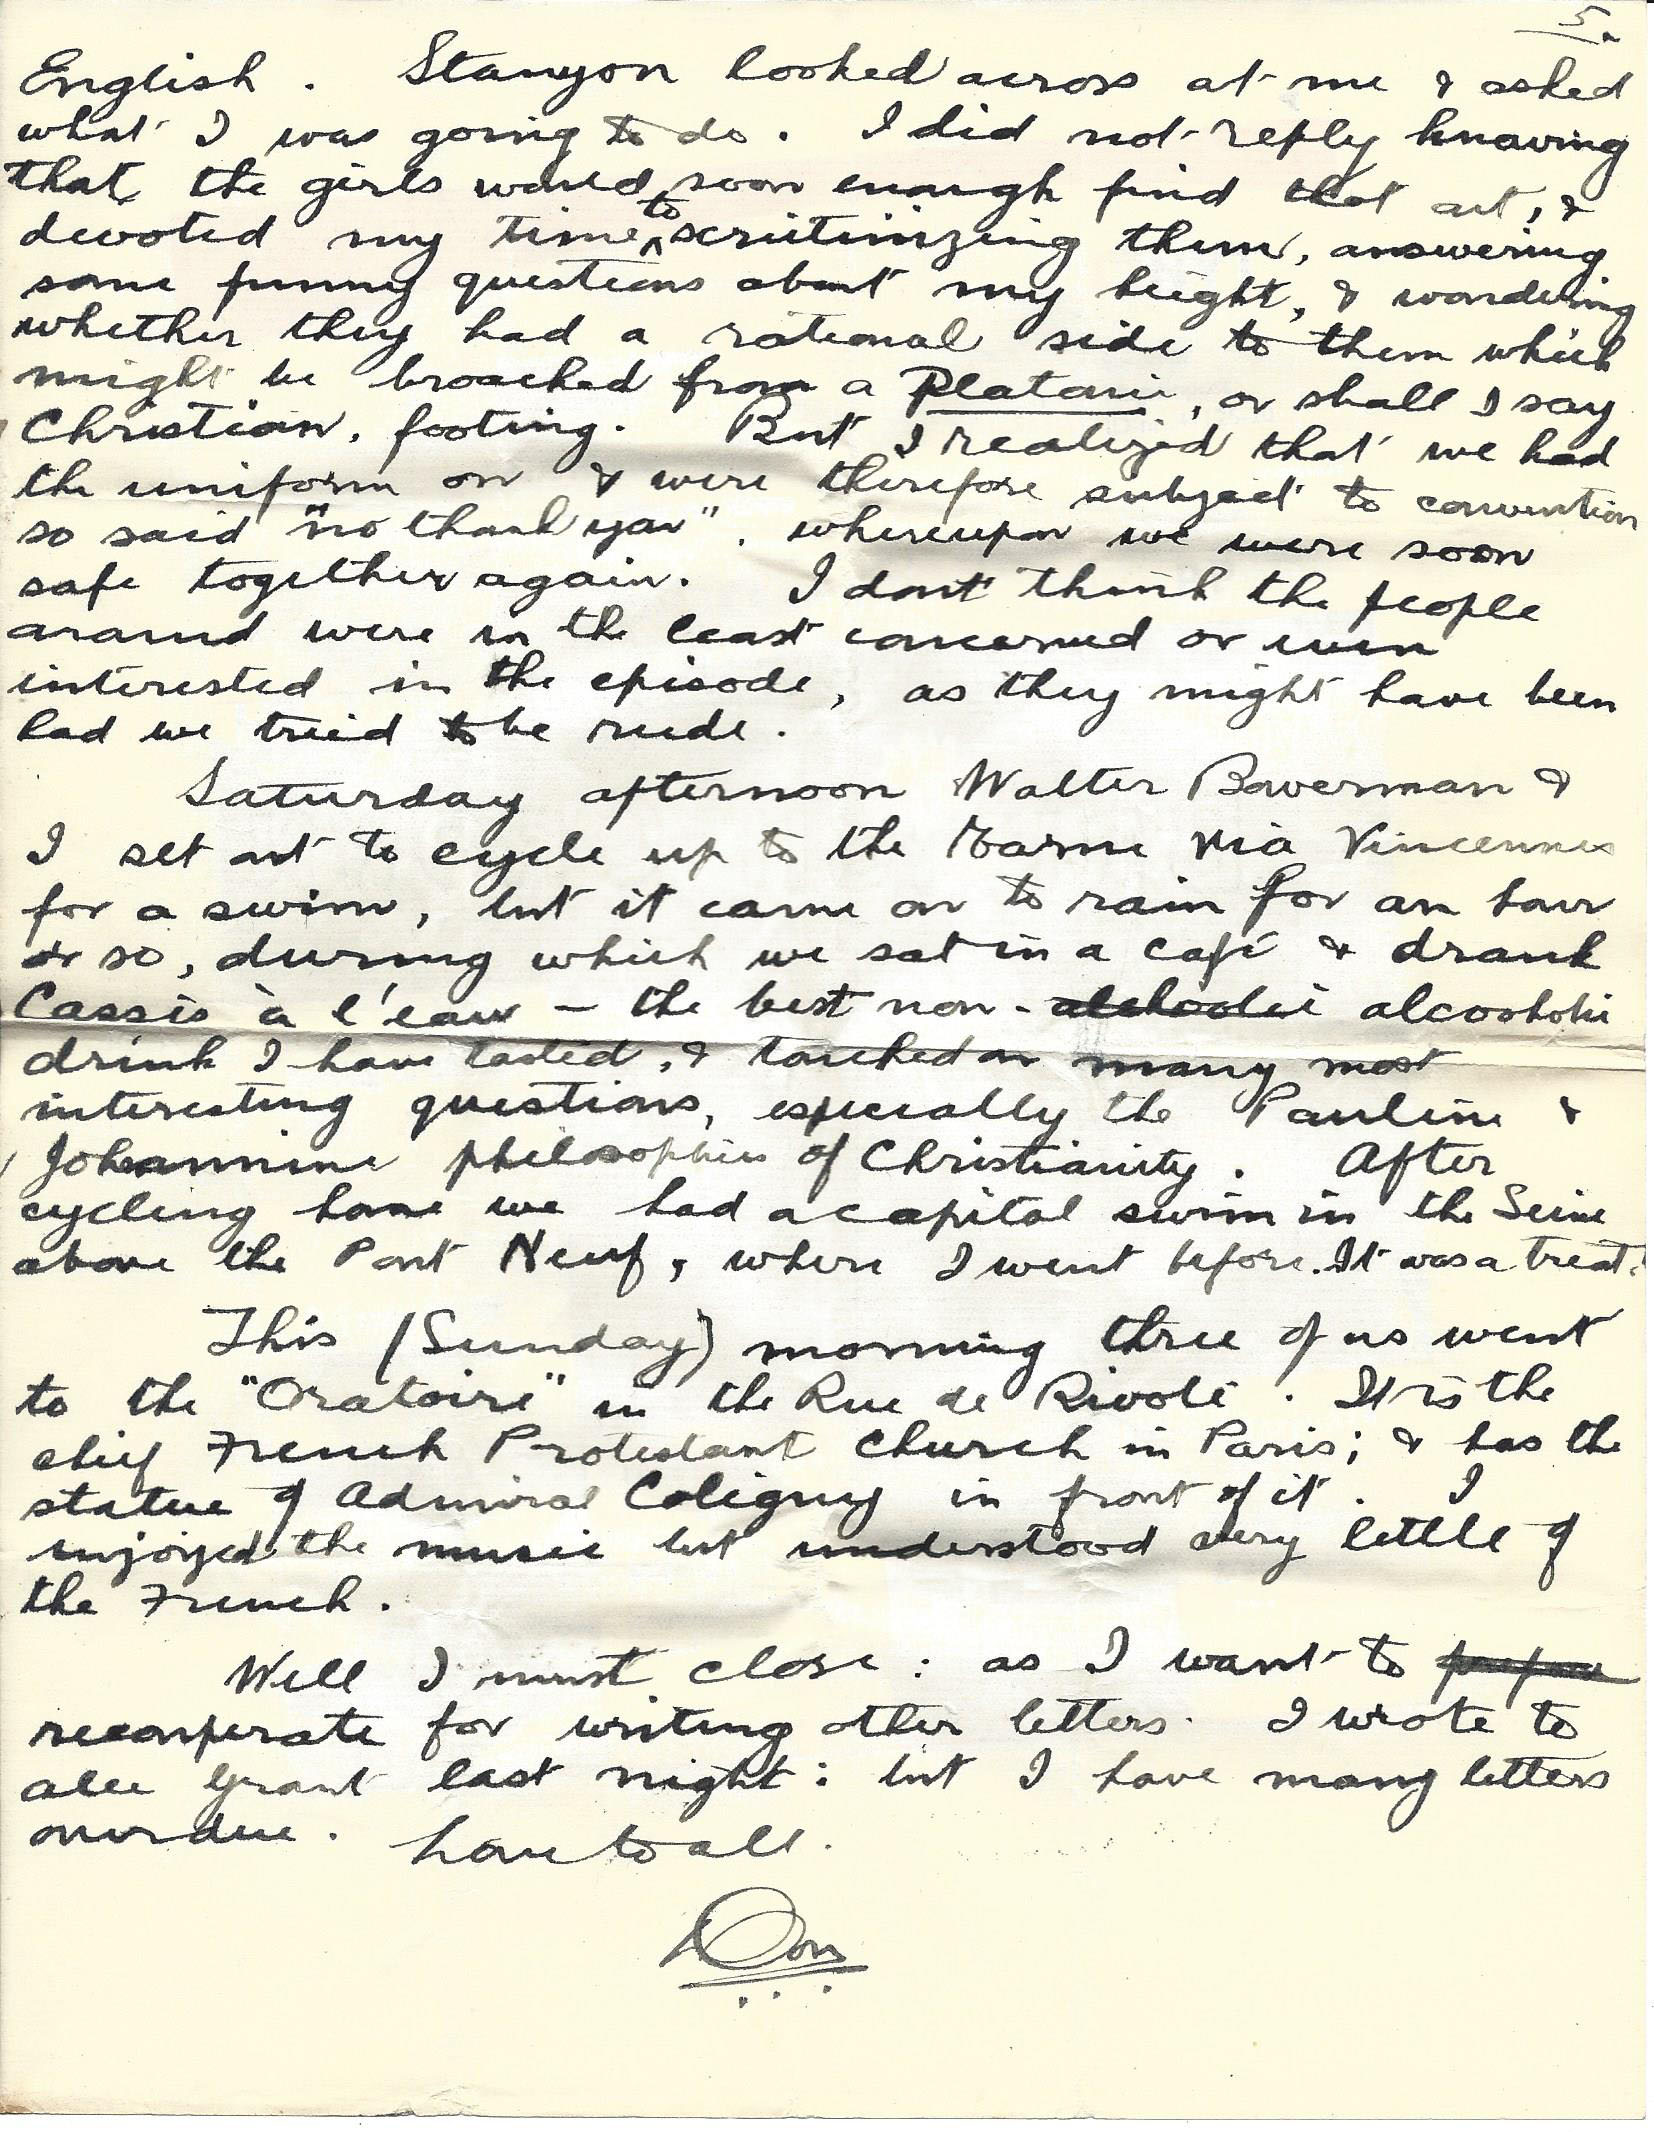 1919-08-16 p5 Donald Bearman letter to his father